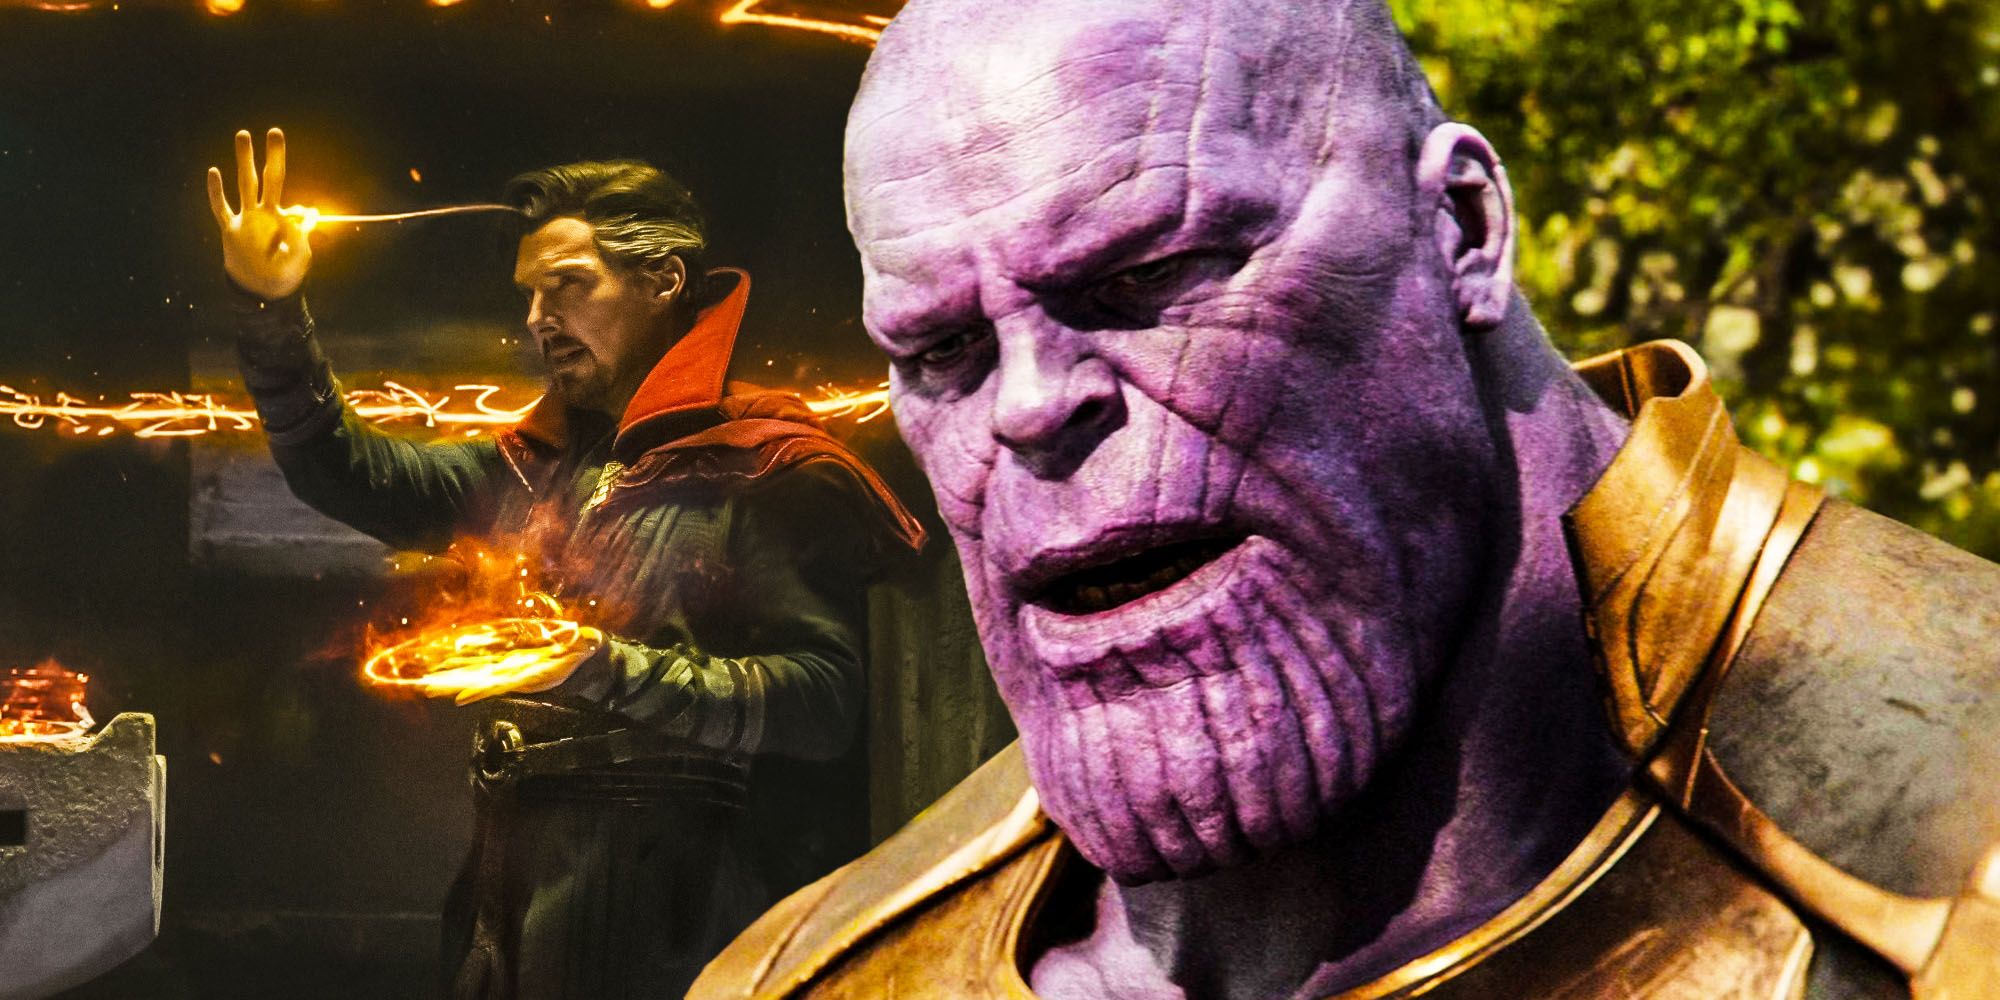 Why Doctor Strange didnt use the memory spell on Thanos in Infinity war